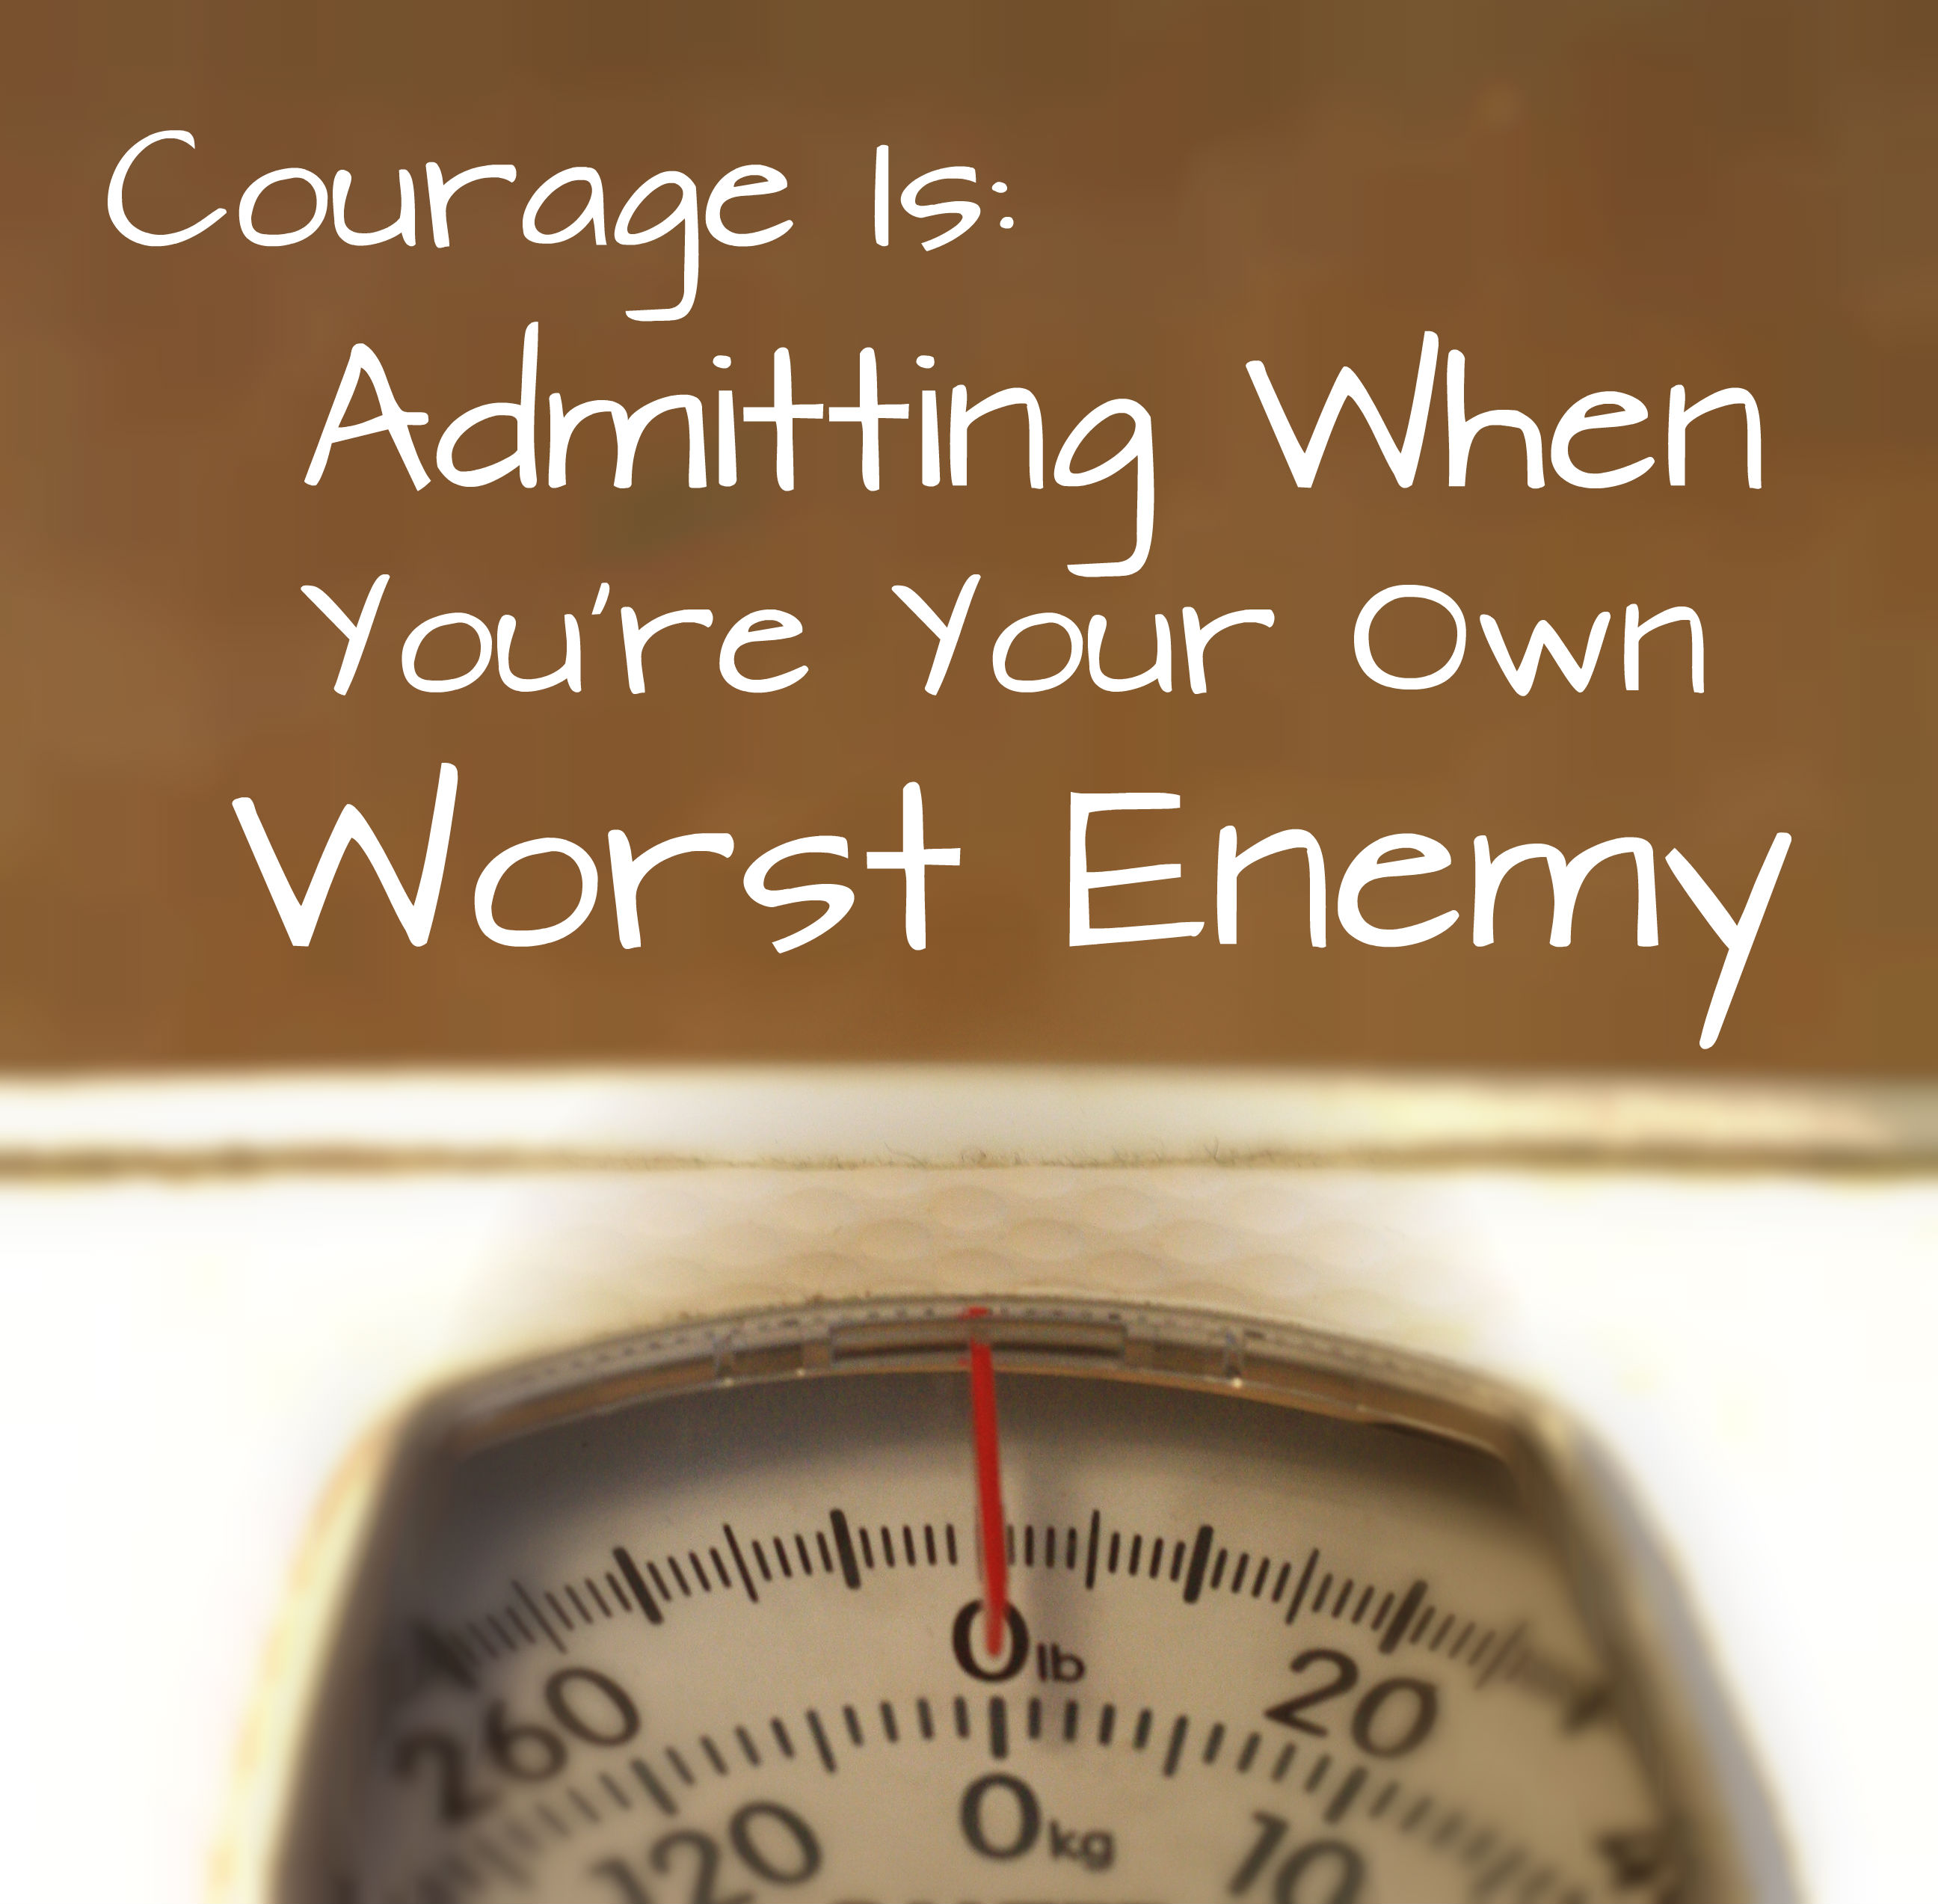 courage-is-admitting-when-youre-your-own-worst-enemy